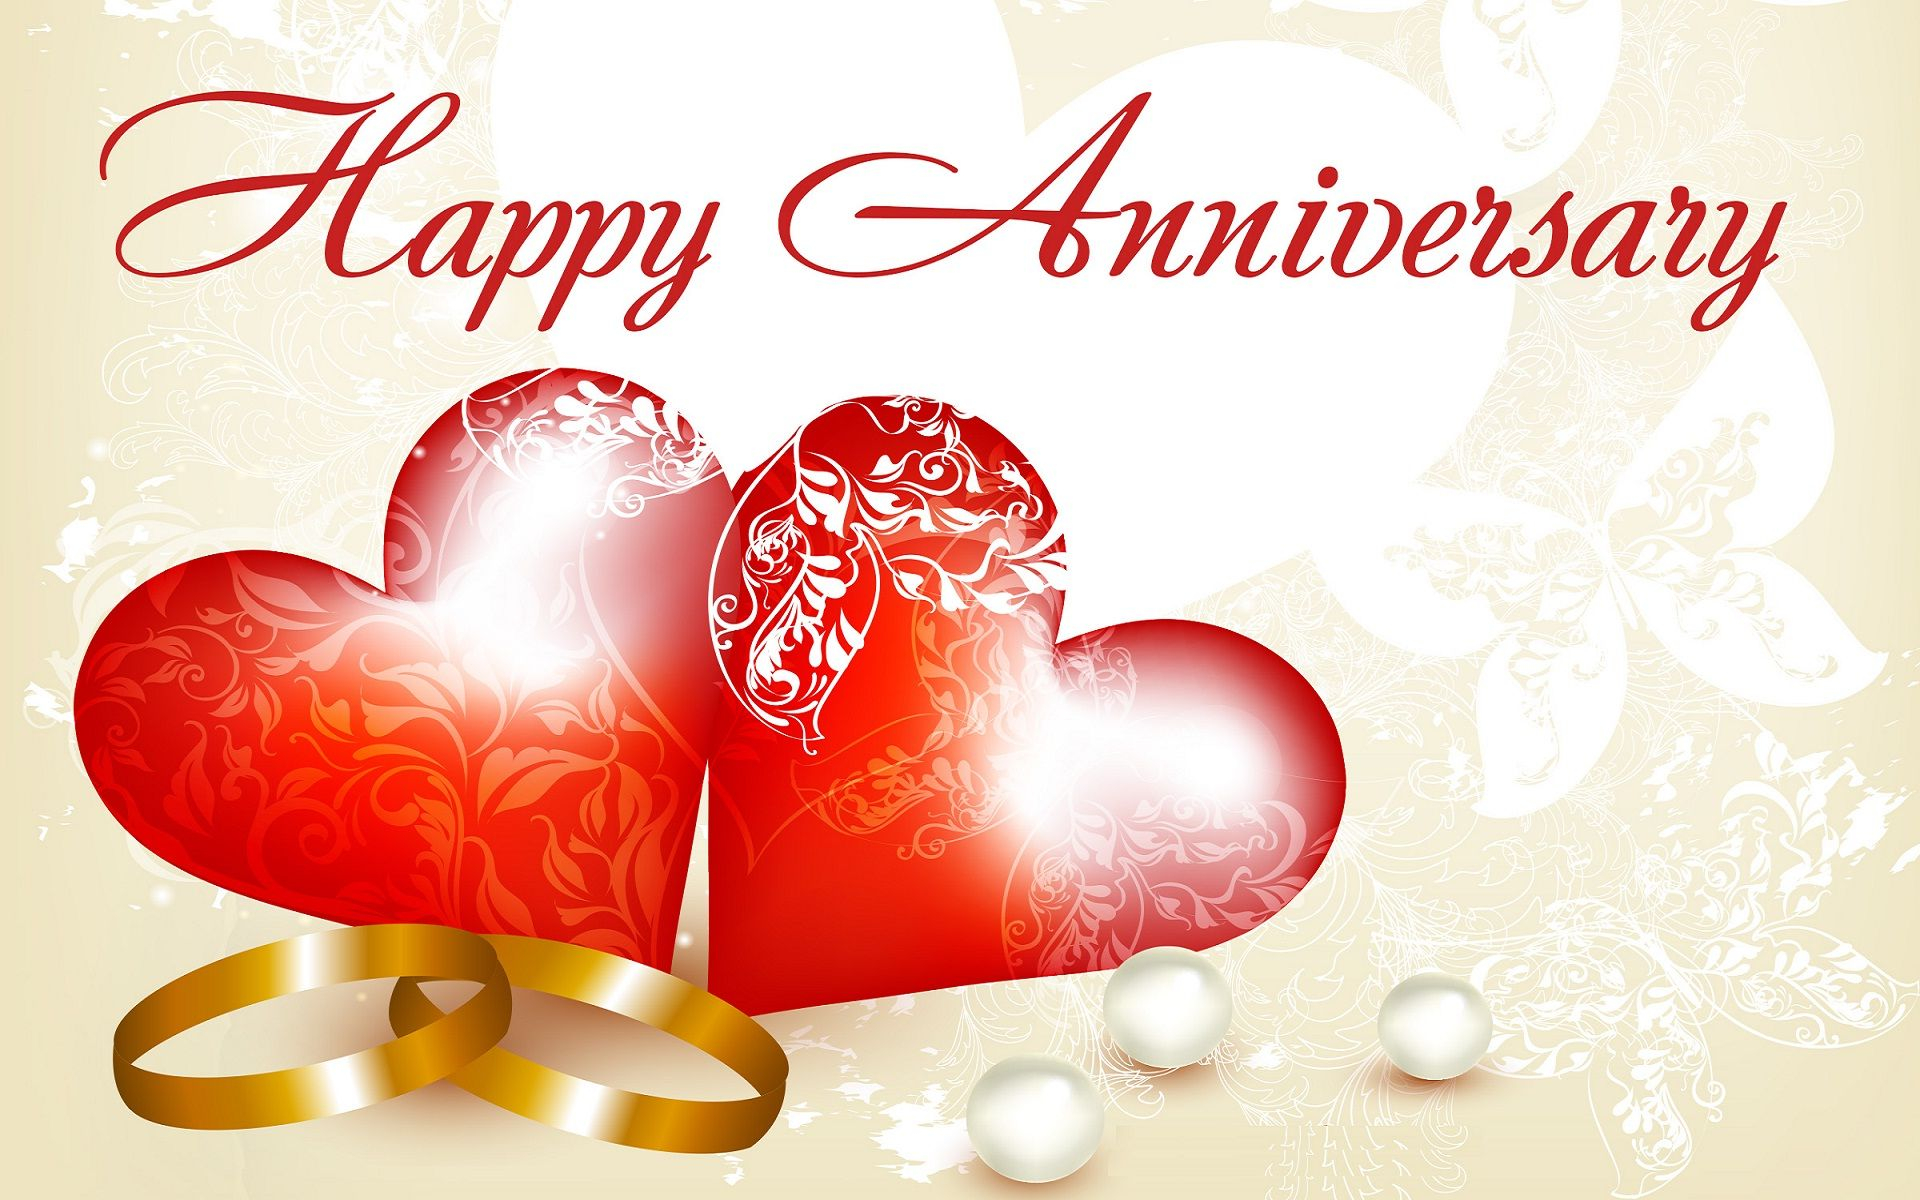 Wedding Anniversary Wallpapers and Backgrounds 4K, HD, Dual Screen